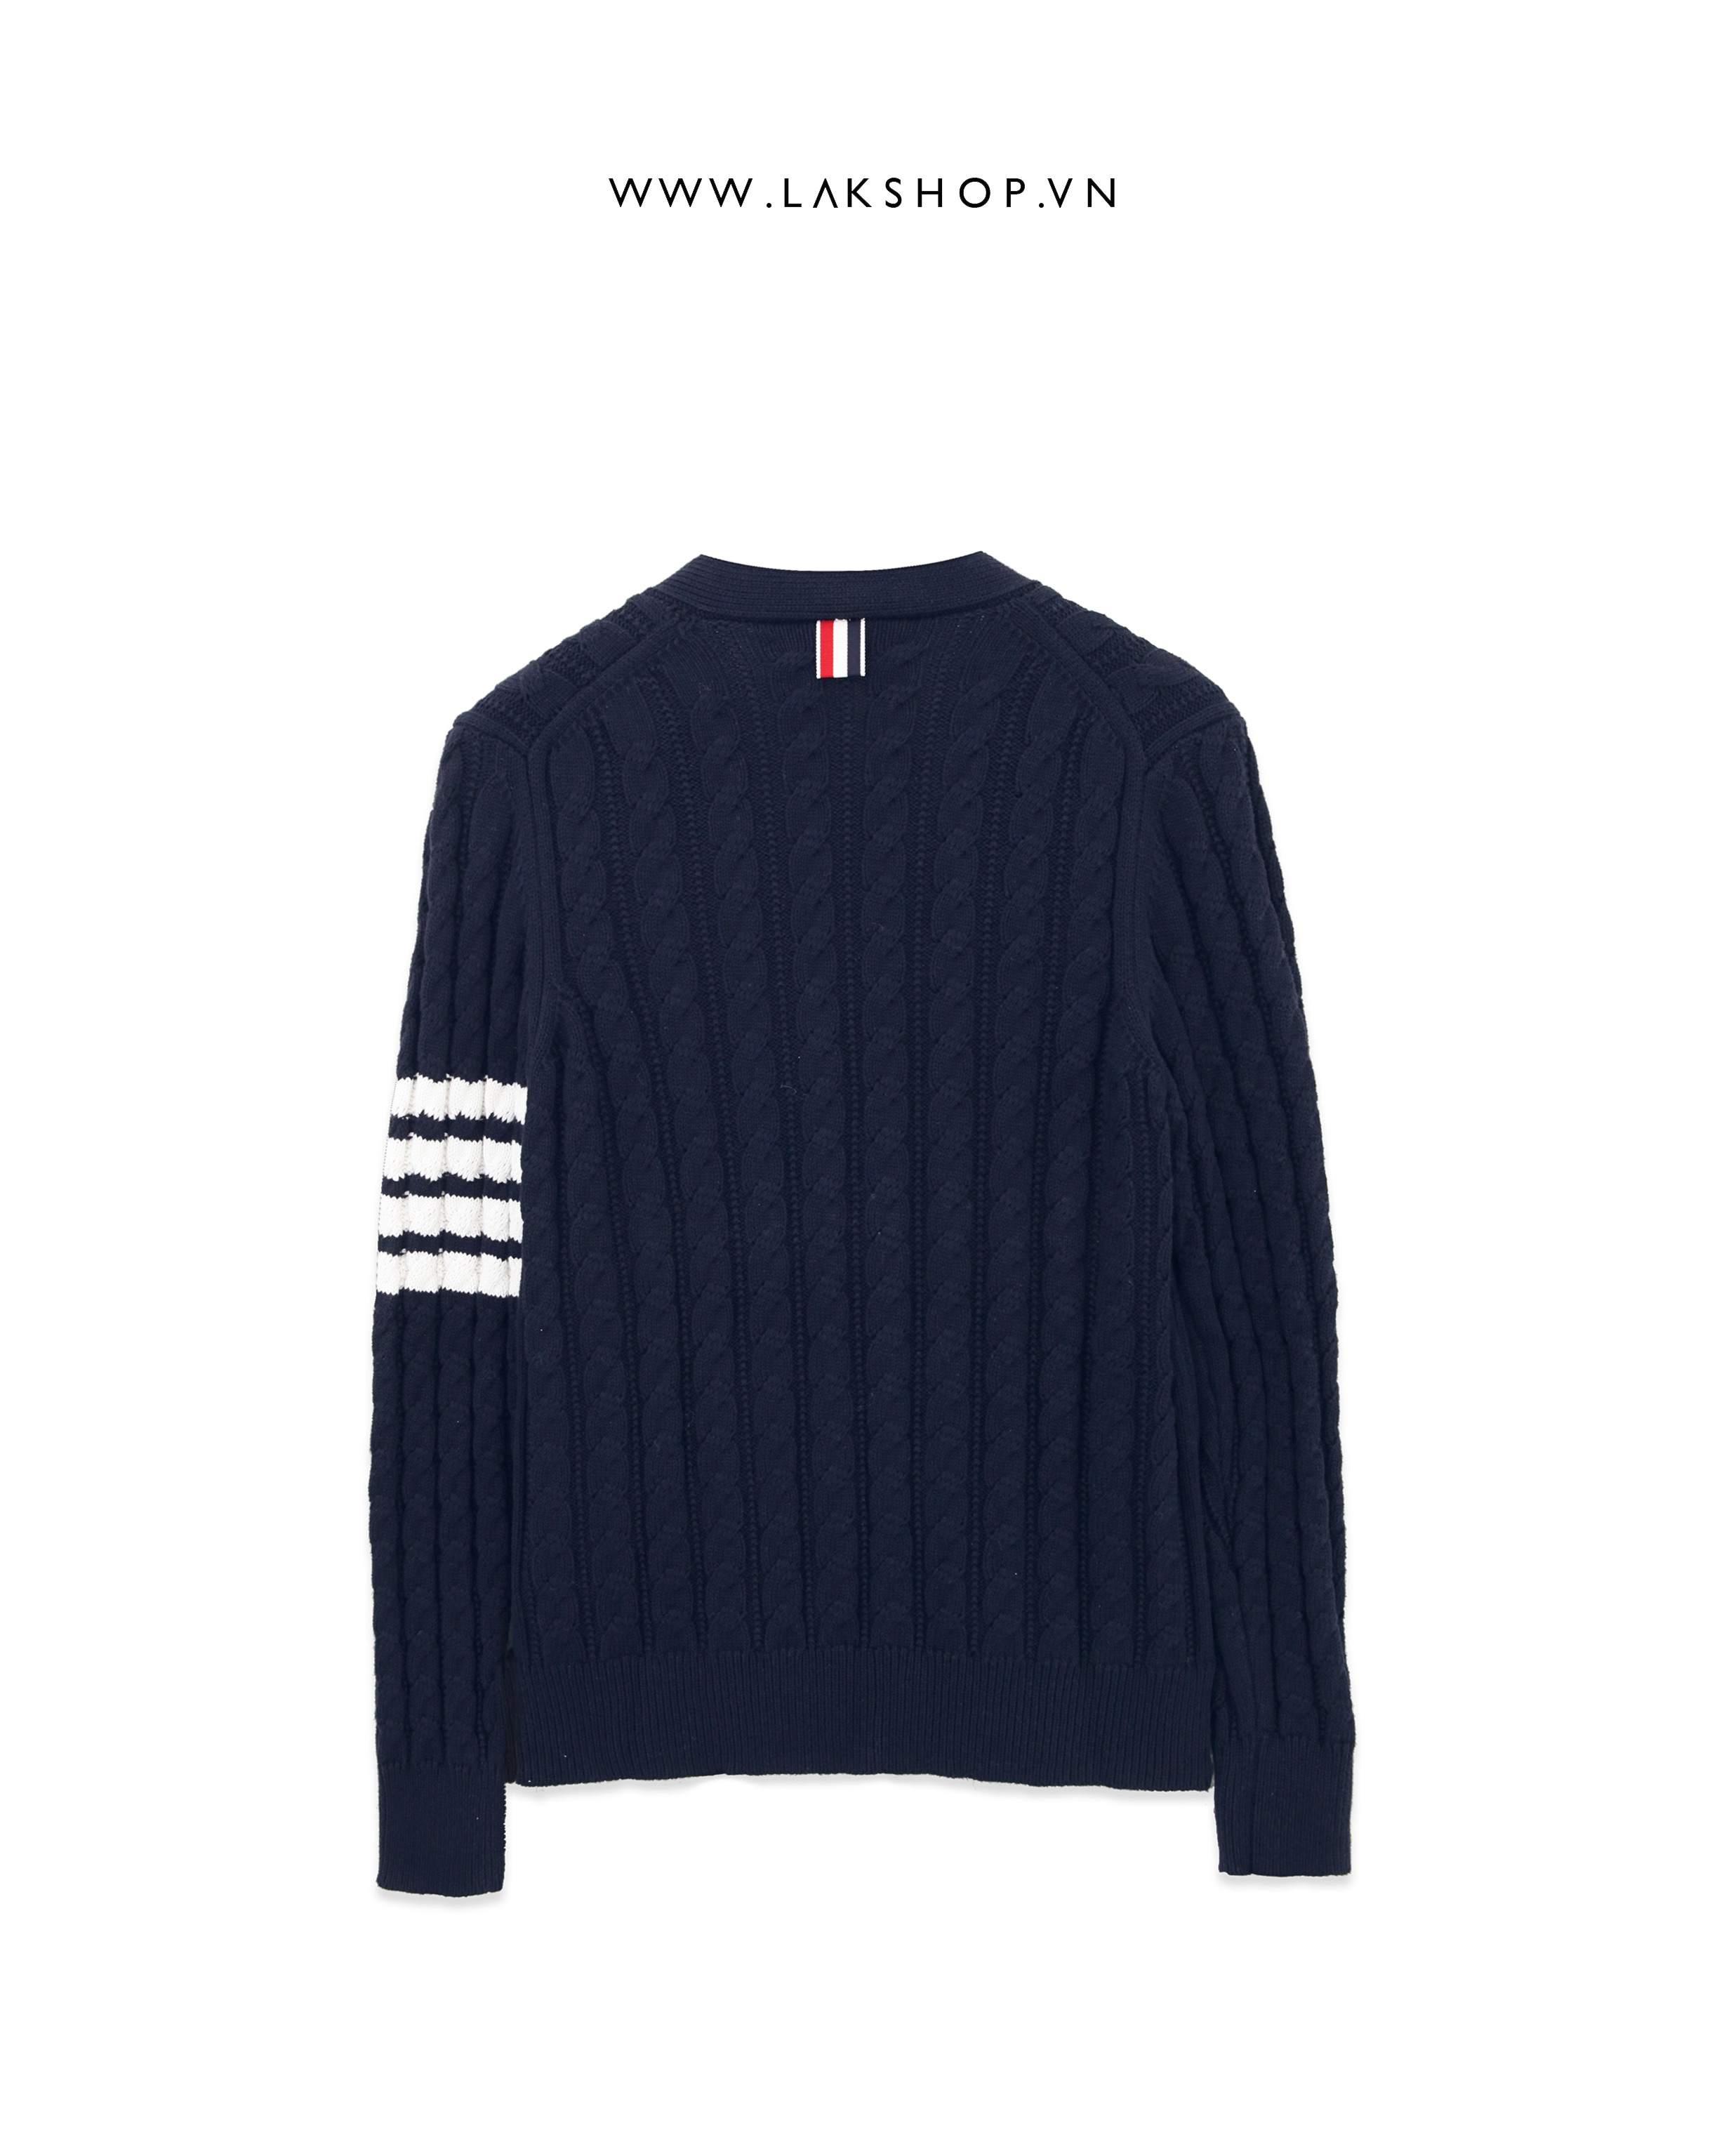 Th0m Br0wne Navy Donegal Twist Cable 4-Bar V-Neck Cardigan